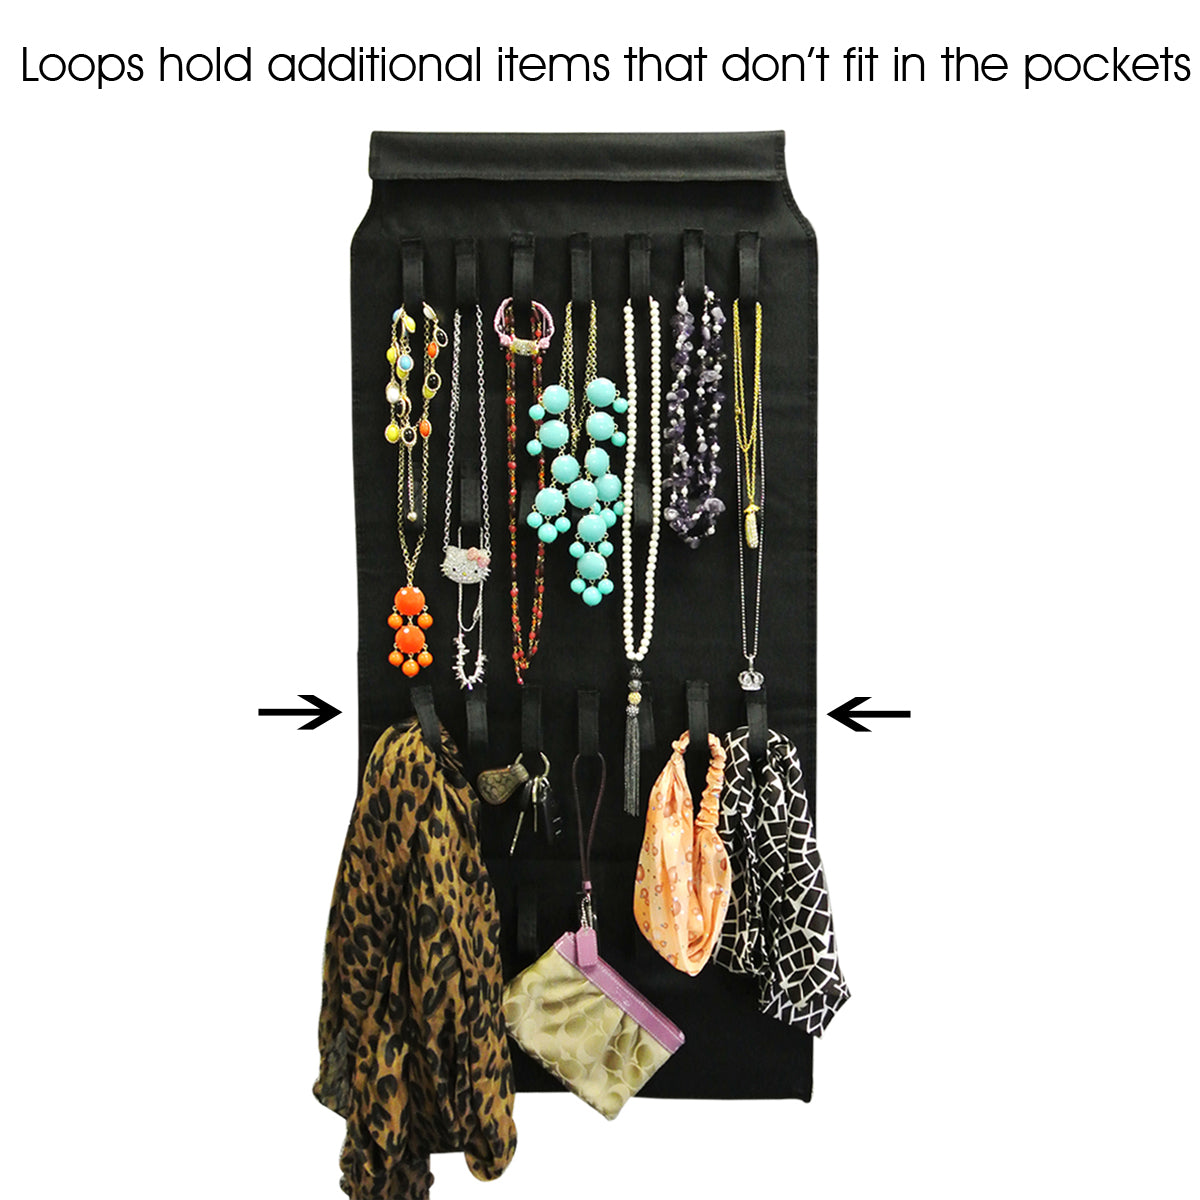 39 Pocket Black Polyester Hanging Jewelry Organizer with 28 Holding Loops + Large Burgundy Silk Embroidered Jewelry Roll